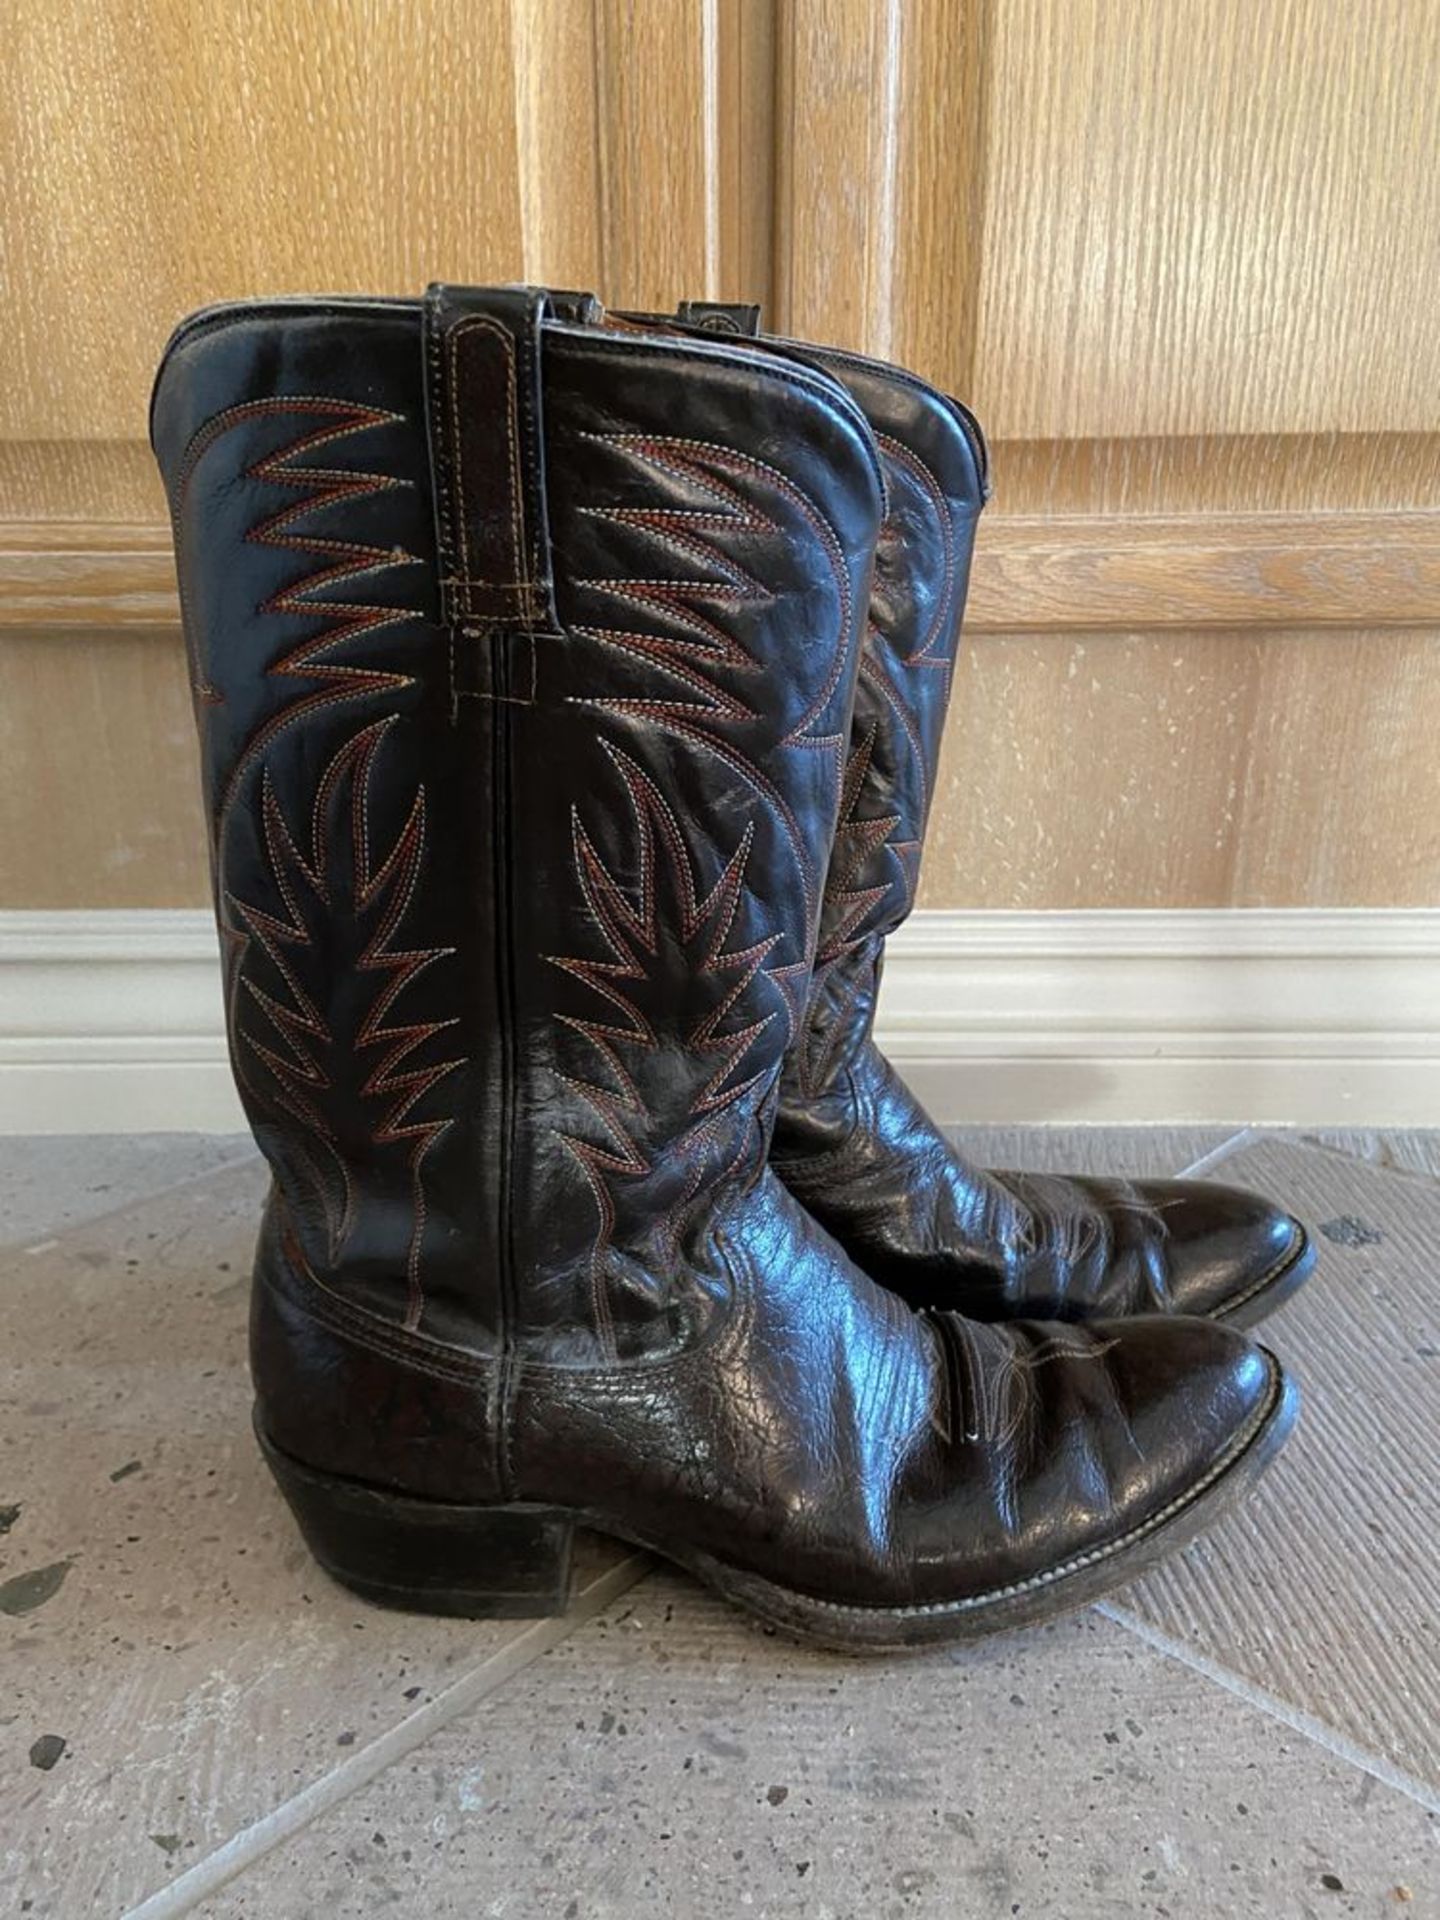 O' Sullivan Cowboy Boots Black, Believed to be Size 10.5 LT6 - Image 3 of 4